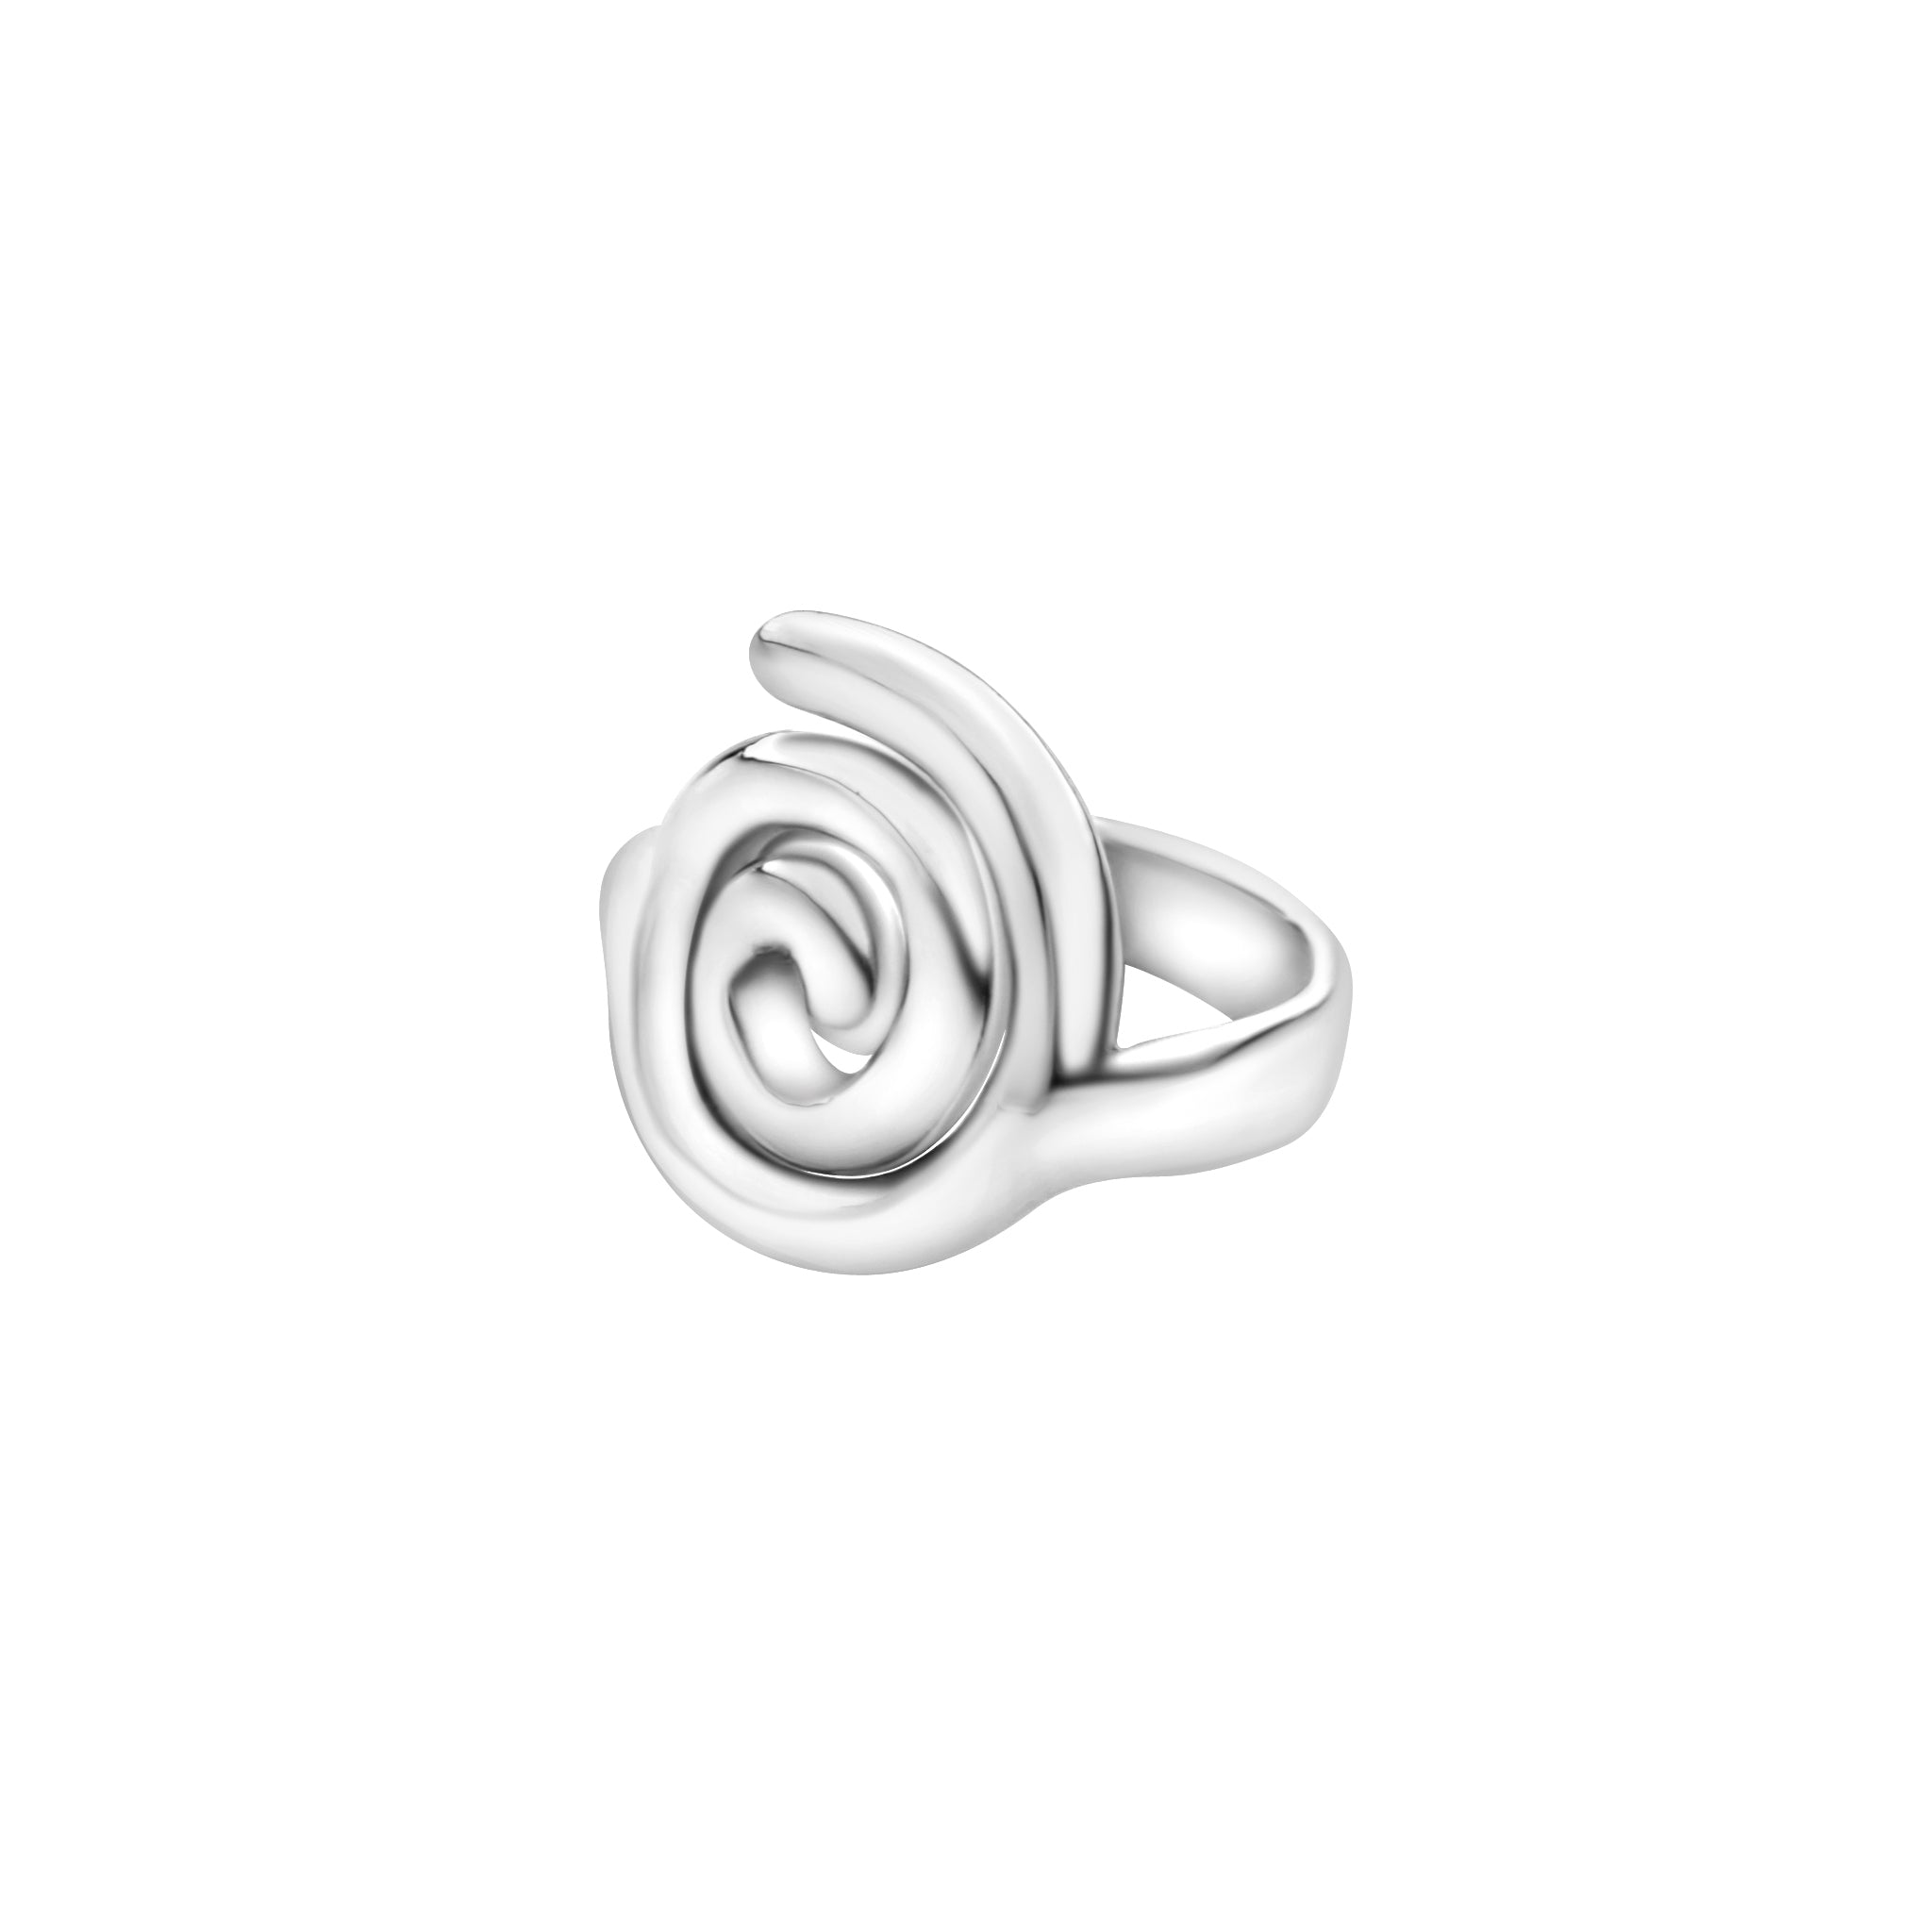 Spiral ring in silver